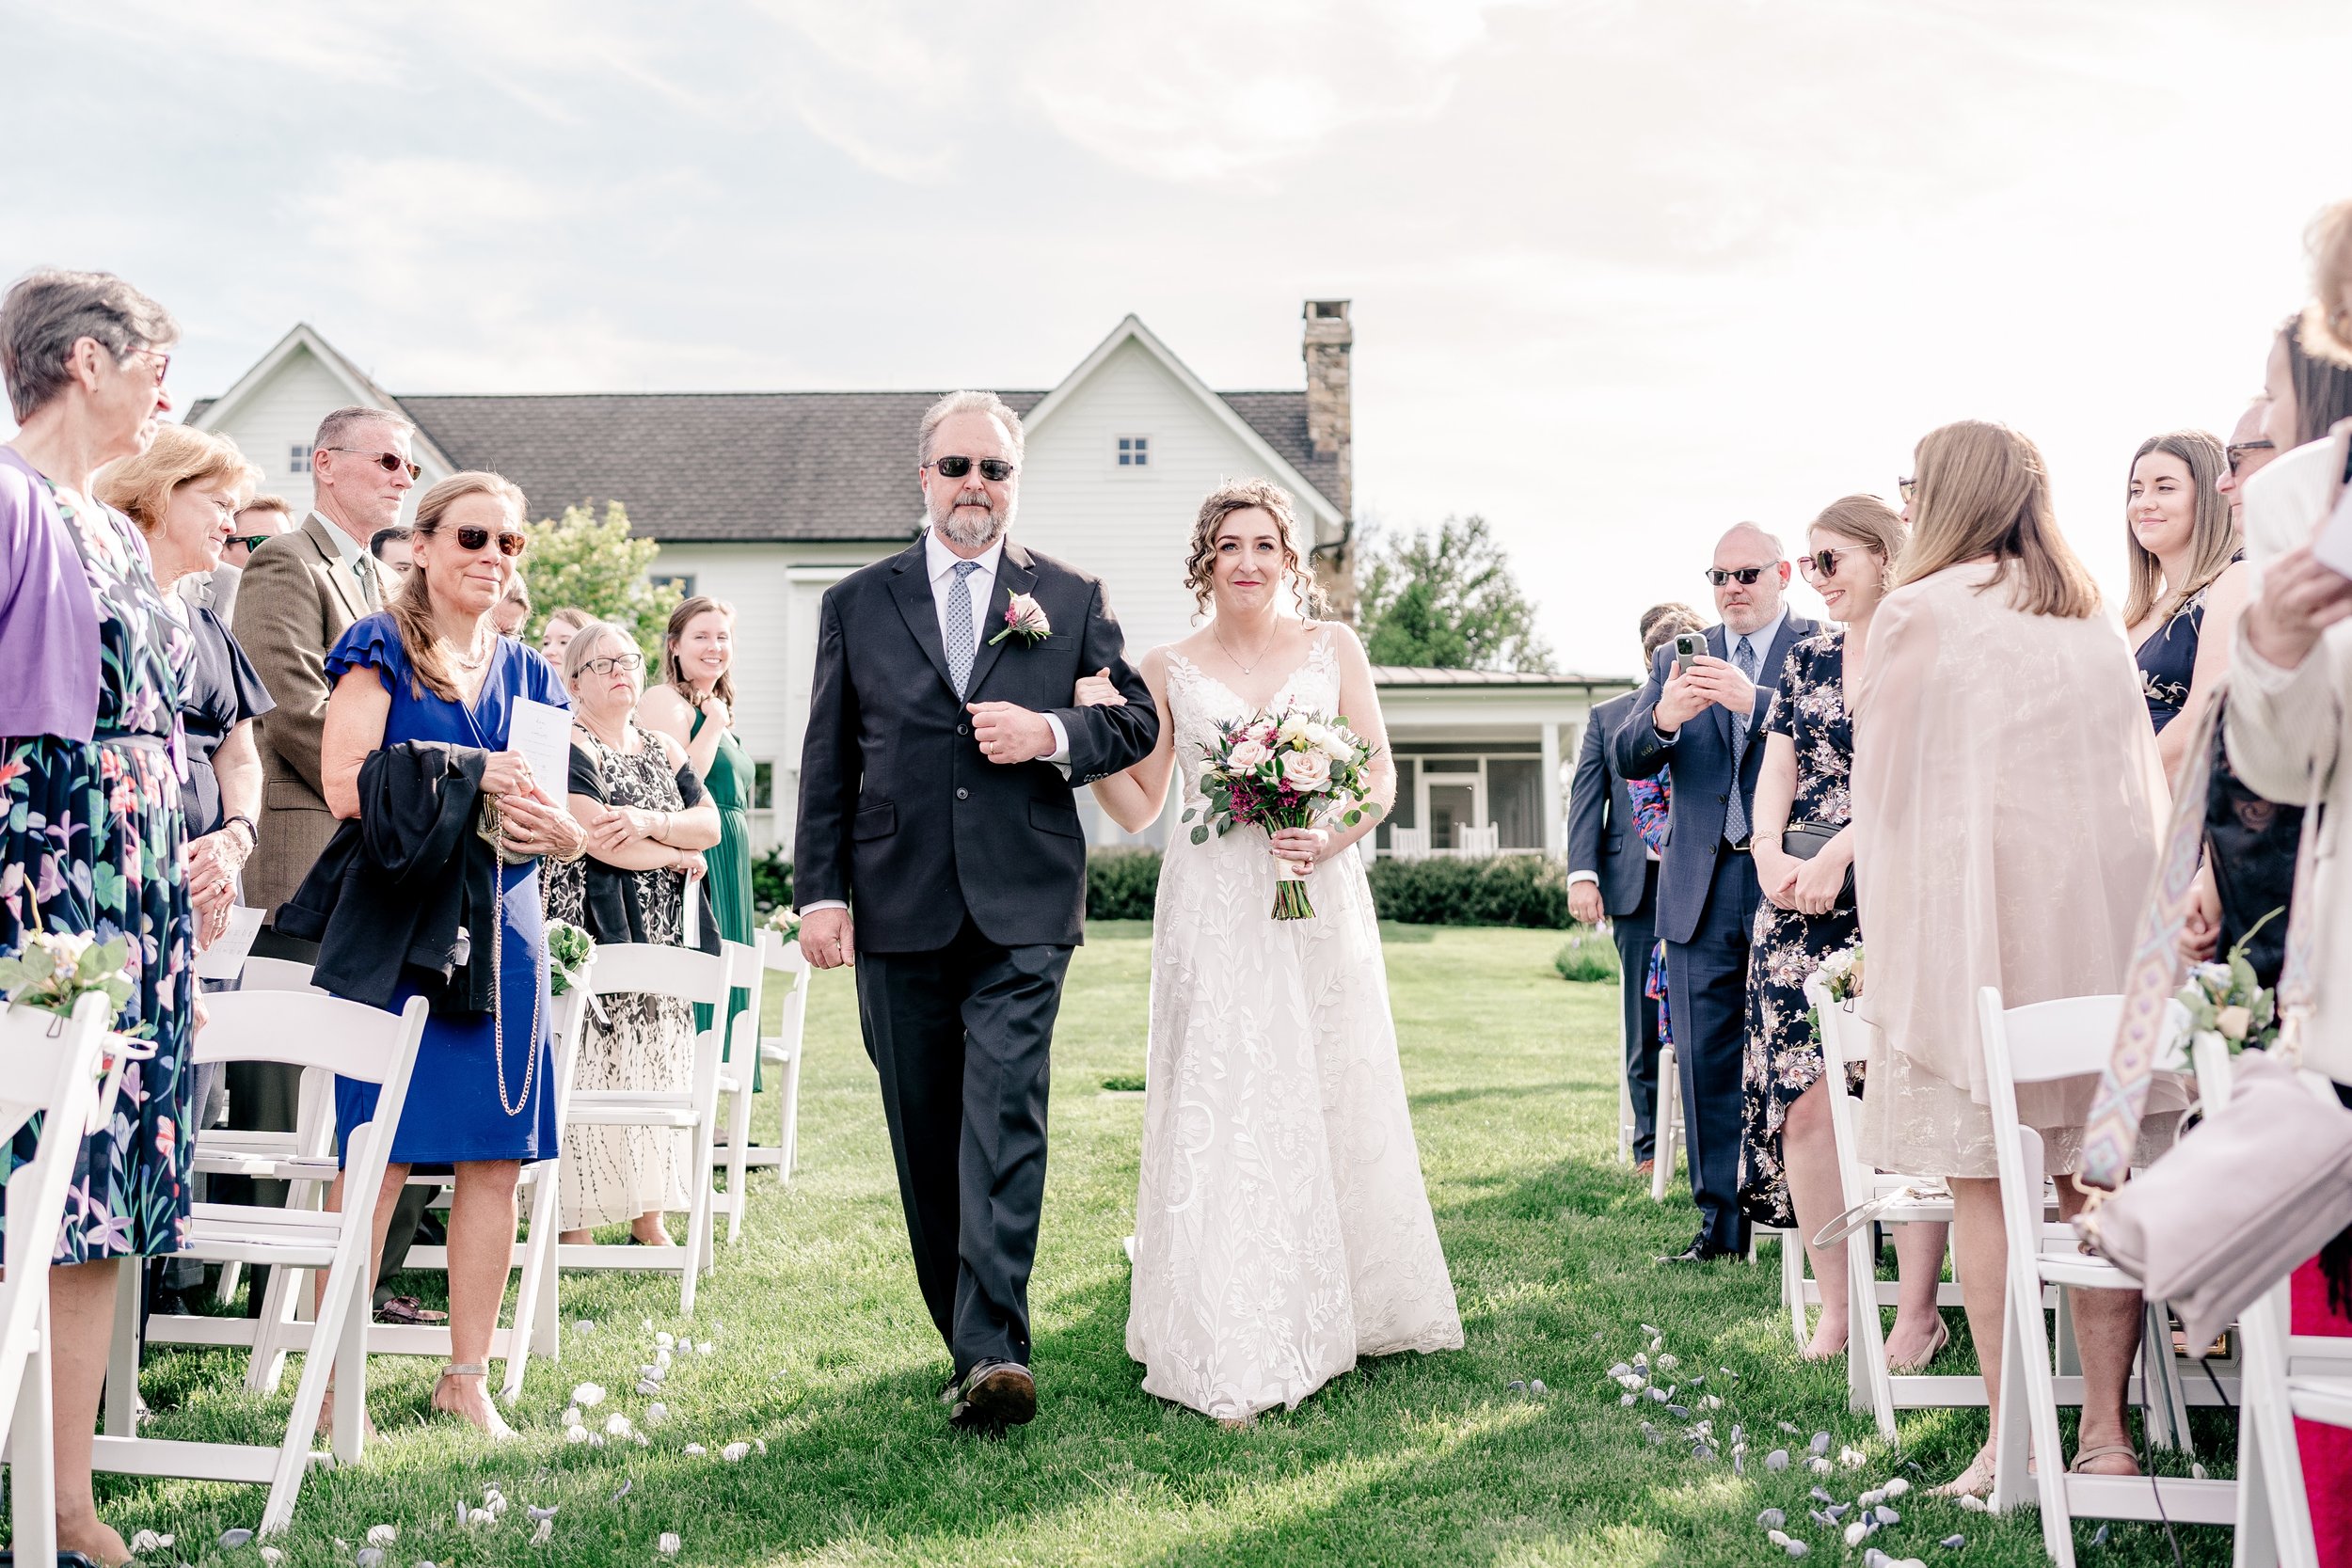 A bride walking down the aisle with her father during her wedding at Blue Hill Farm in Northern Virginia